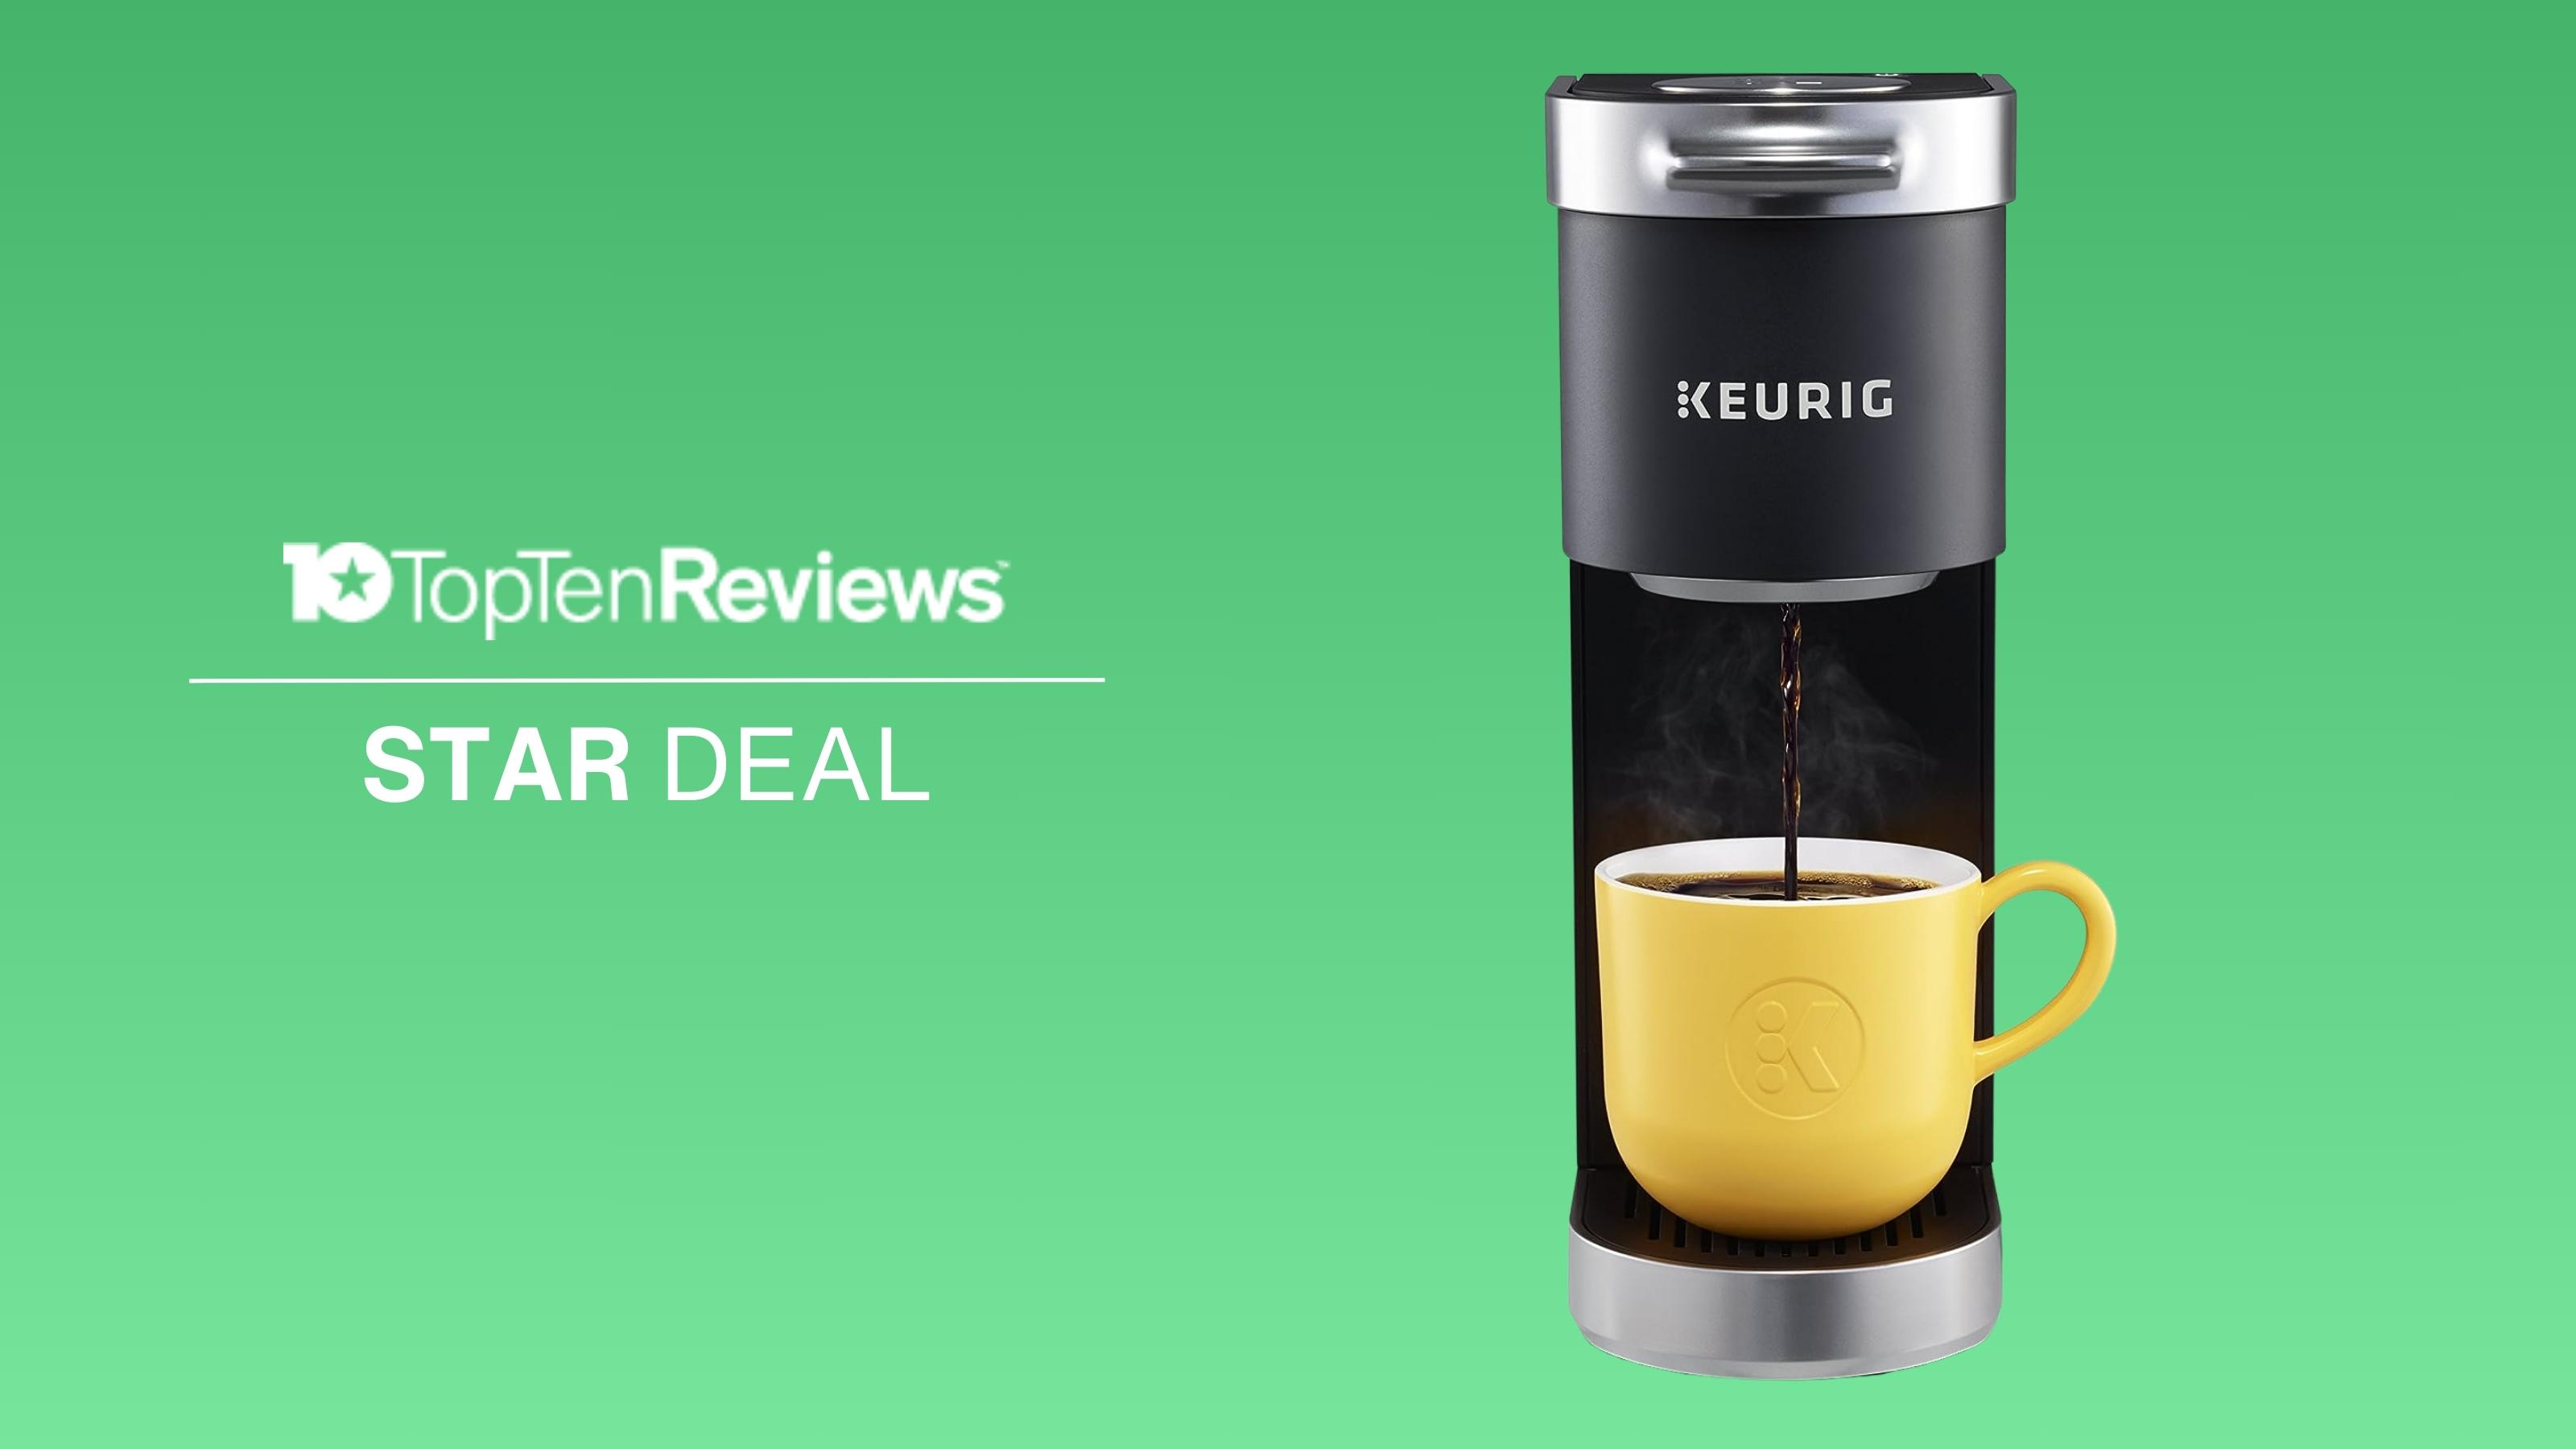 Black Friday 2020: The best deals on Keurig products